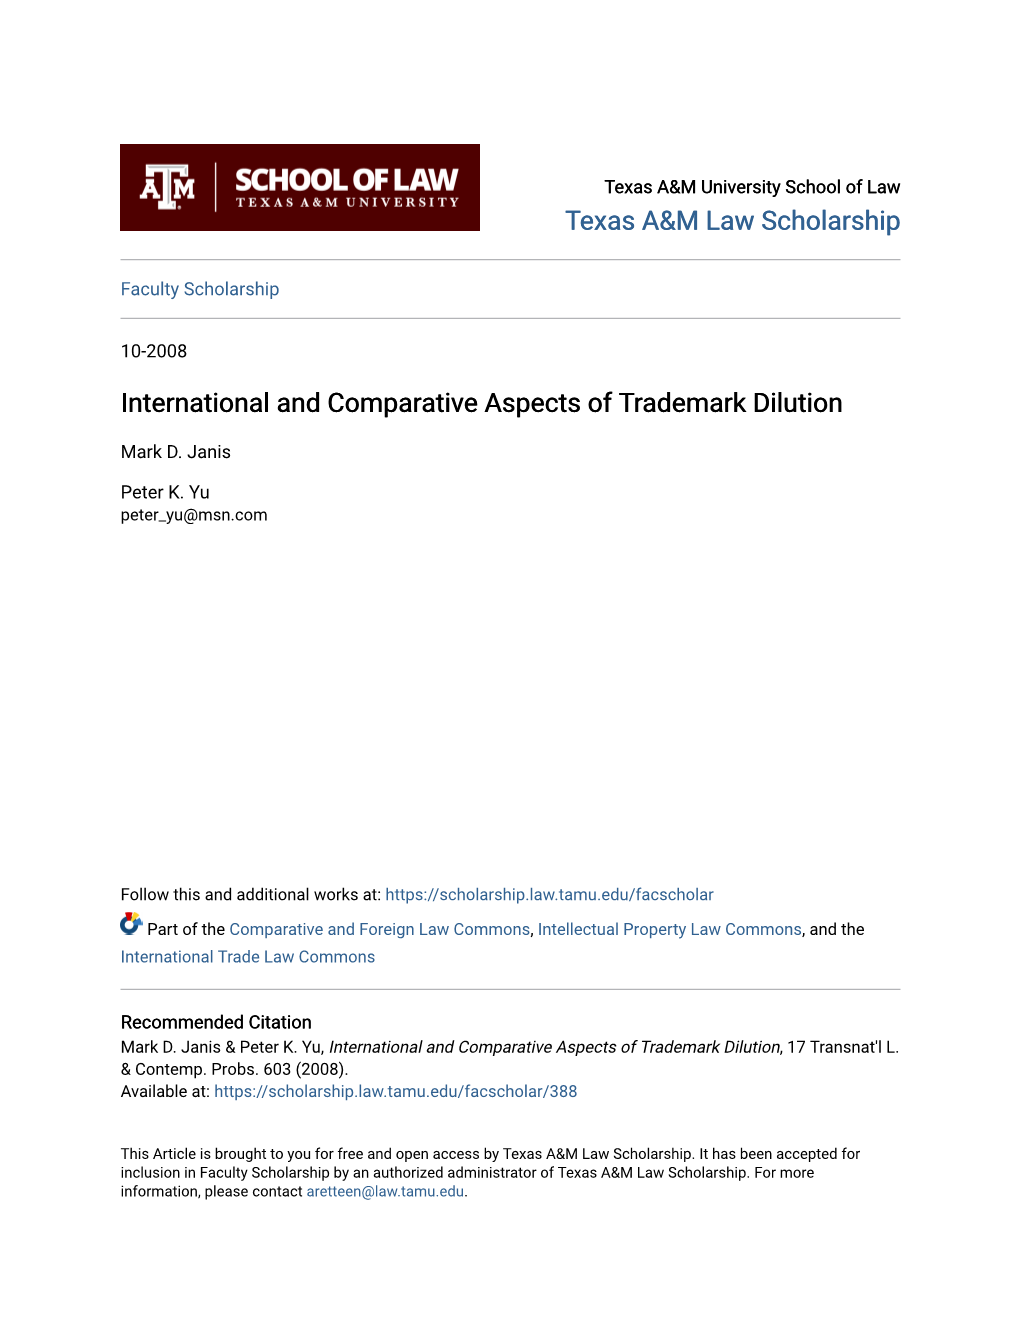 International and Comparative Aspects of Trademark Dilution